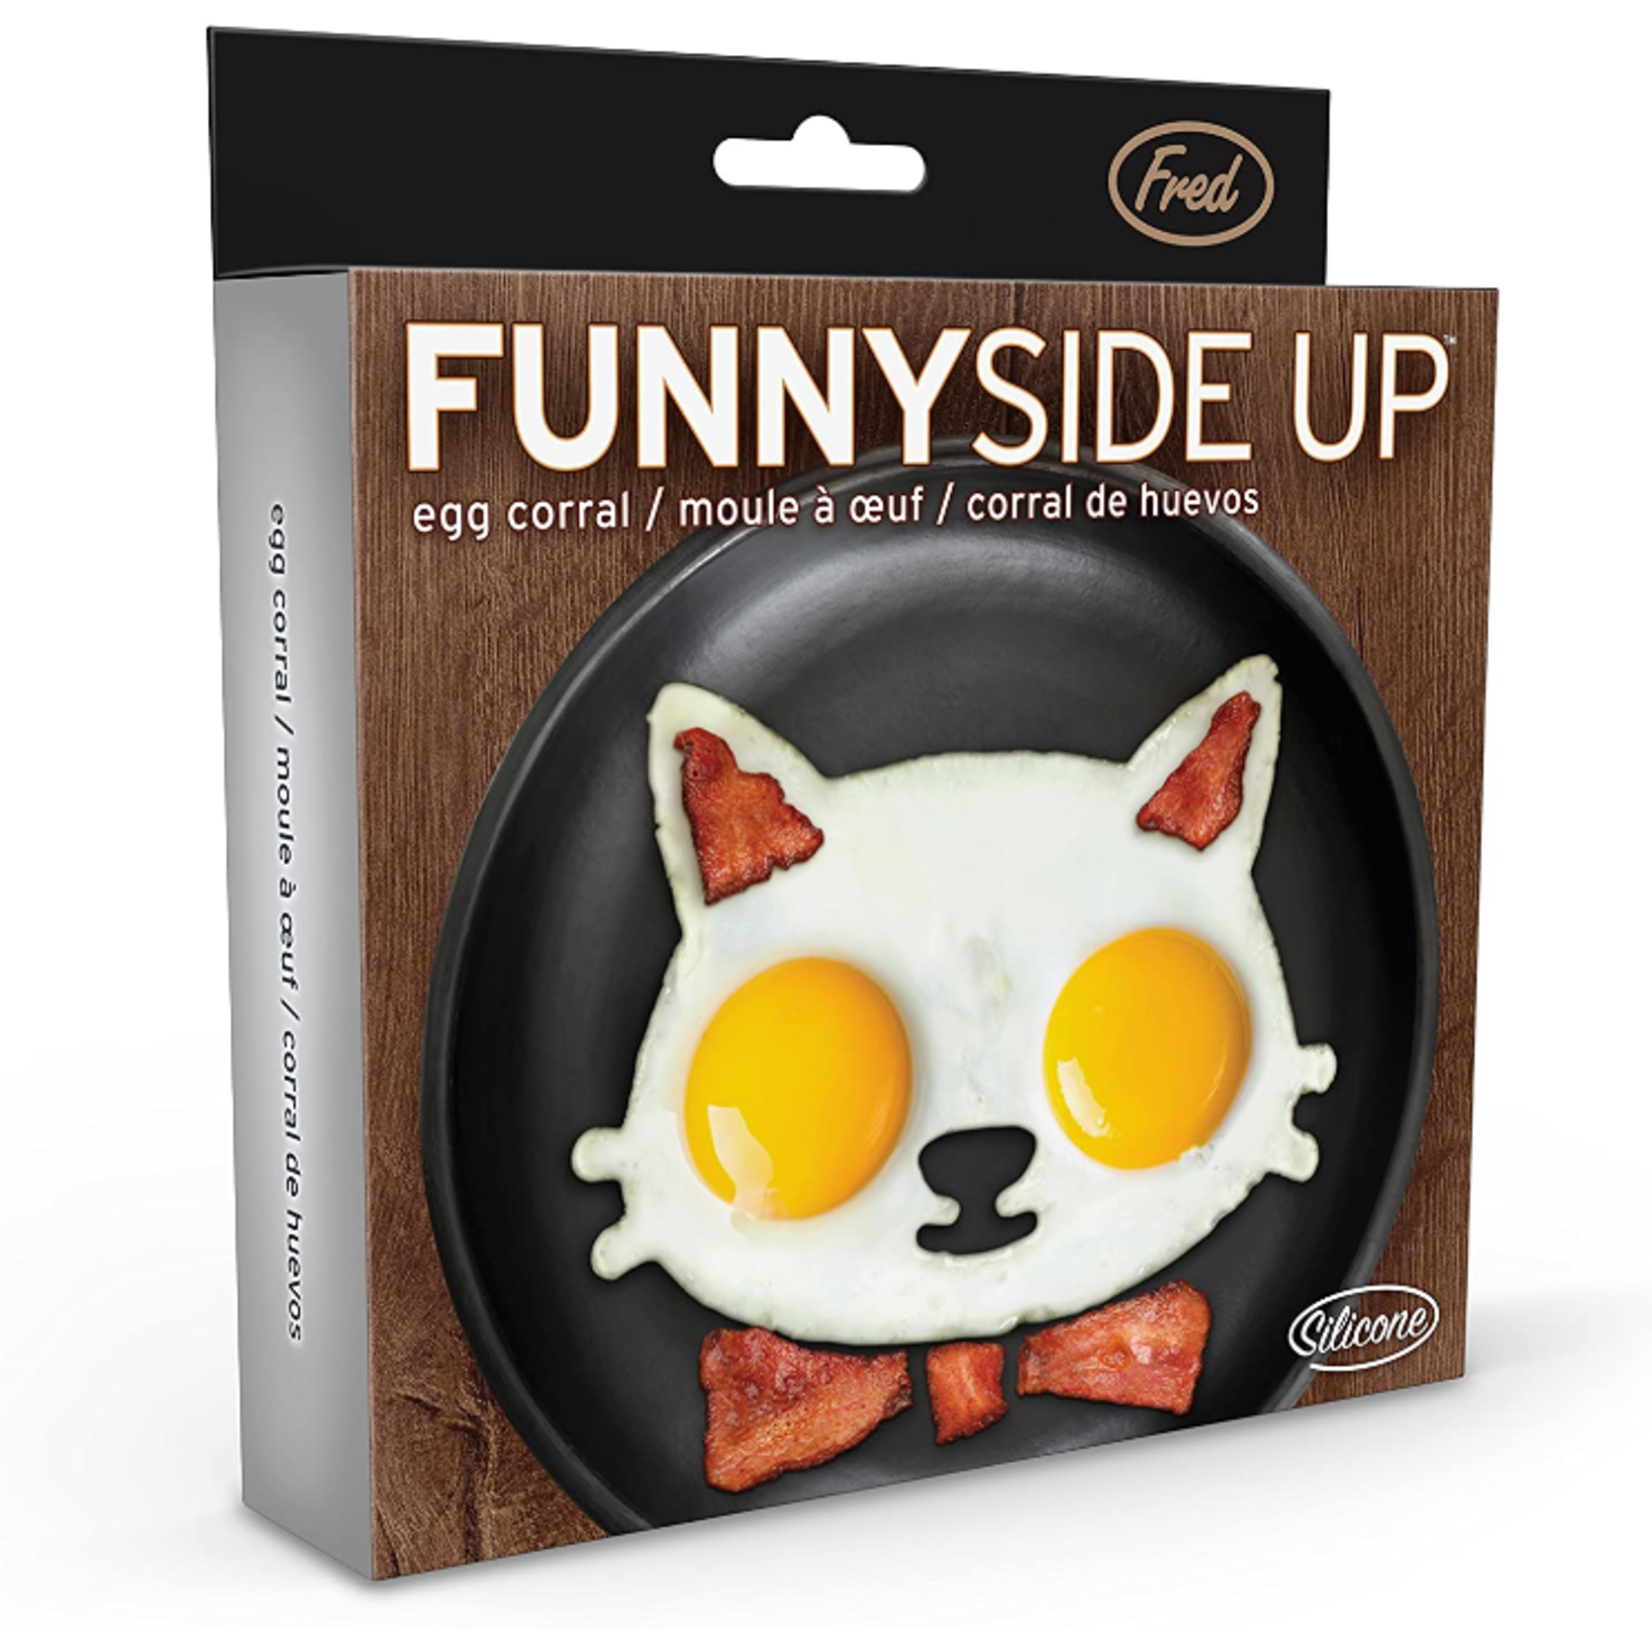 Fred & Friends Funny Side Up Egg Mold, Cat